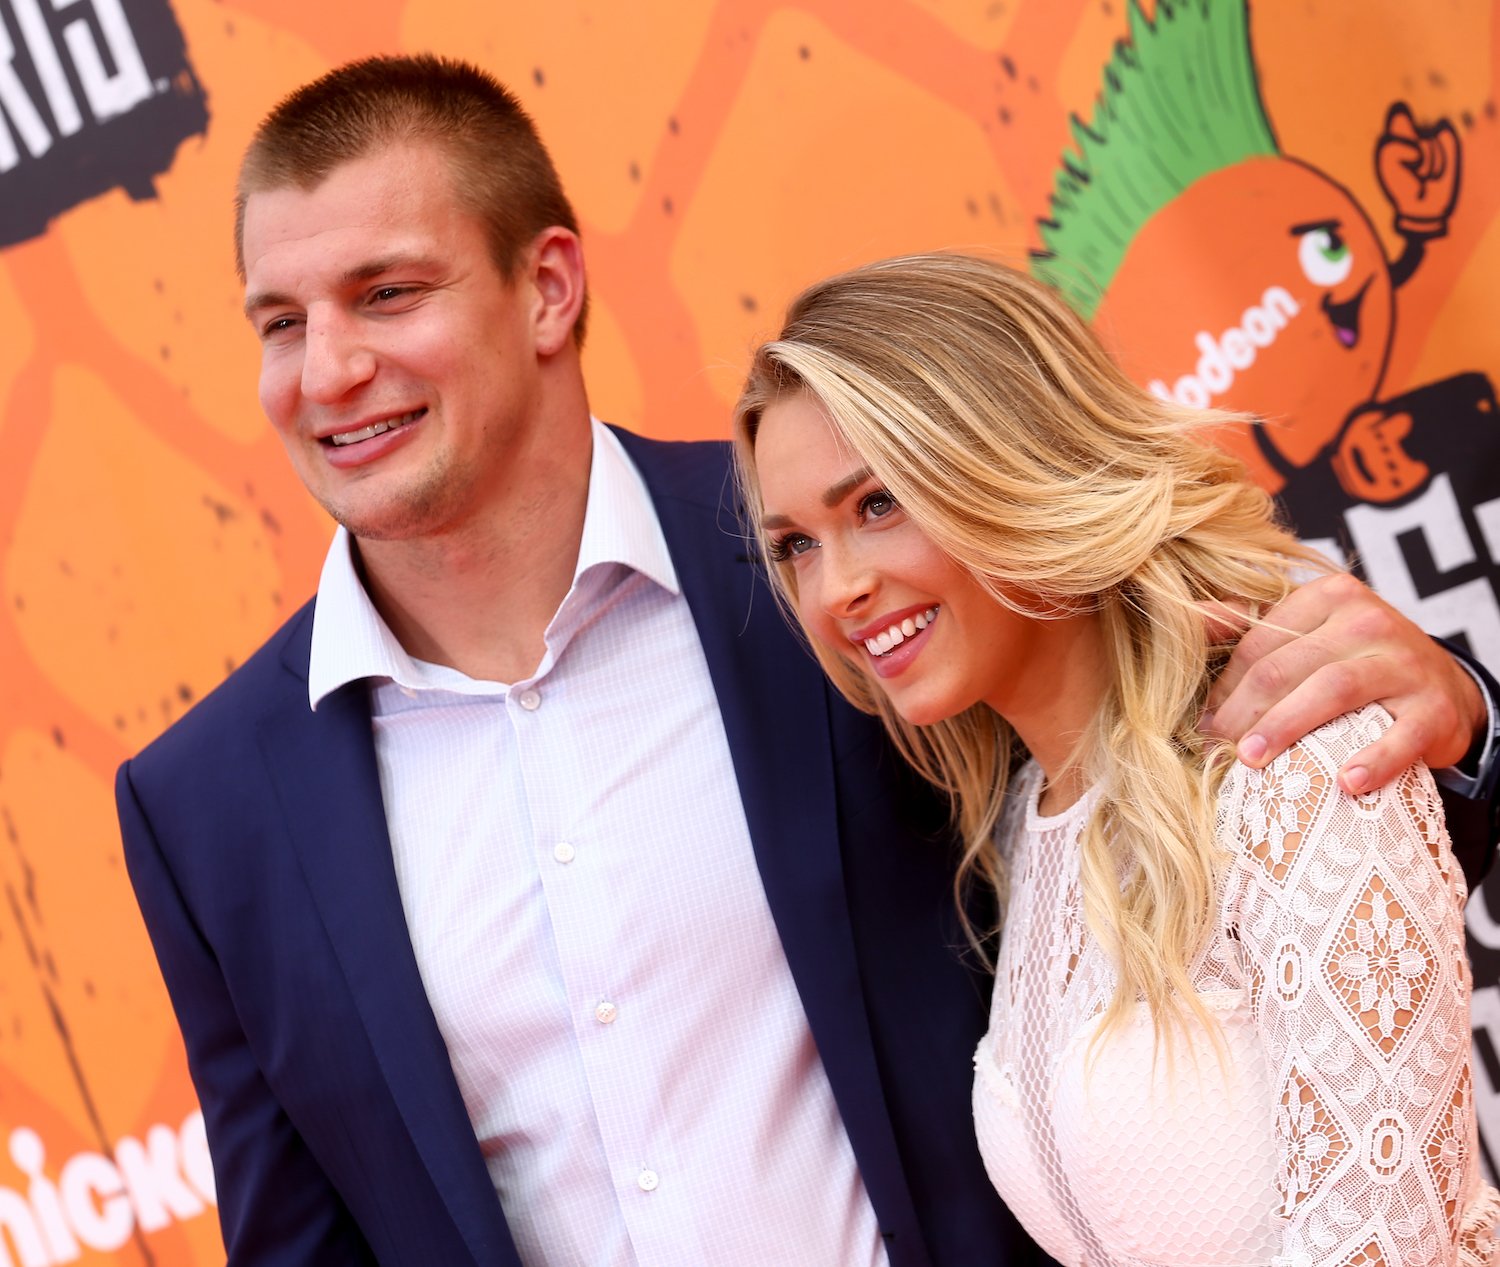 Rob Gronkowski and girlfriend Camille Kostek attend the Nickelodeon Kids' Choice Sports Awards in 2016